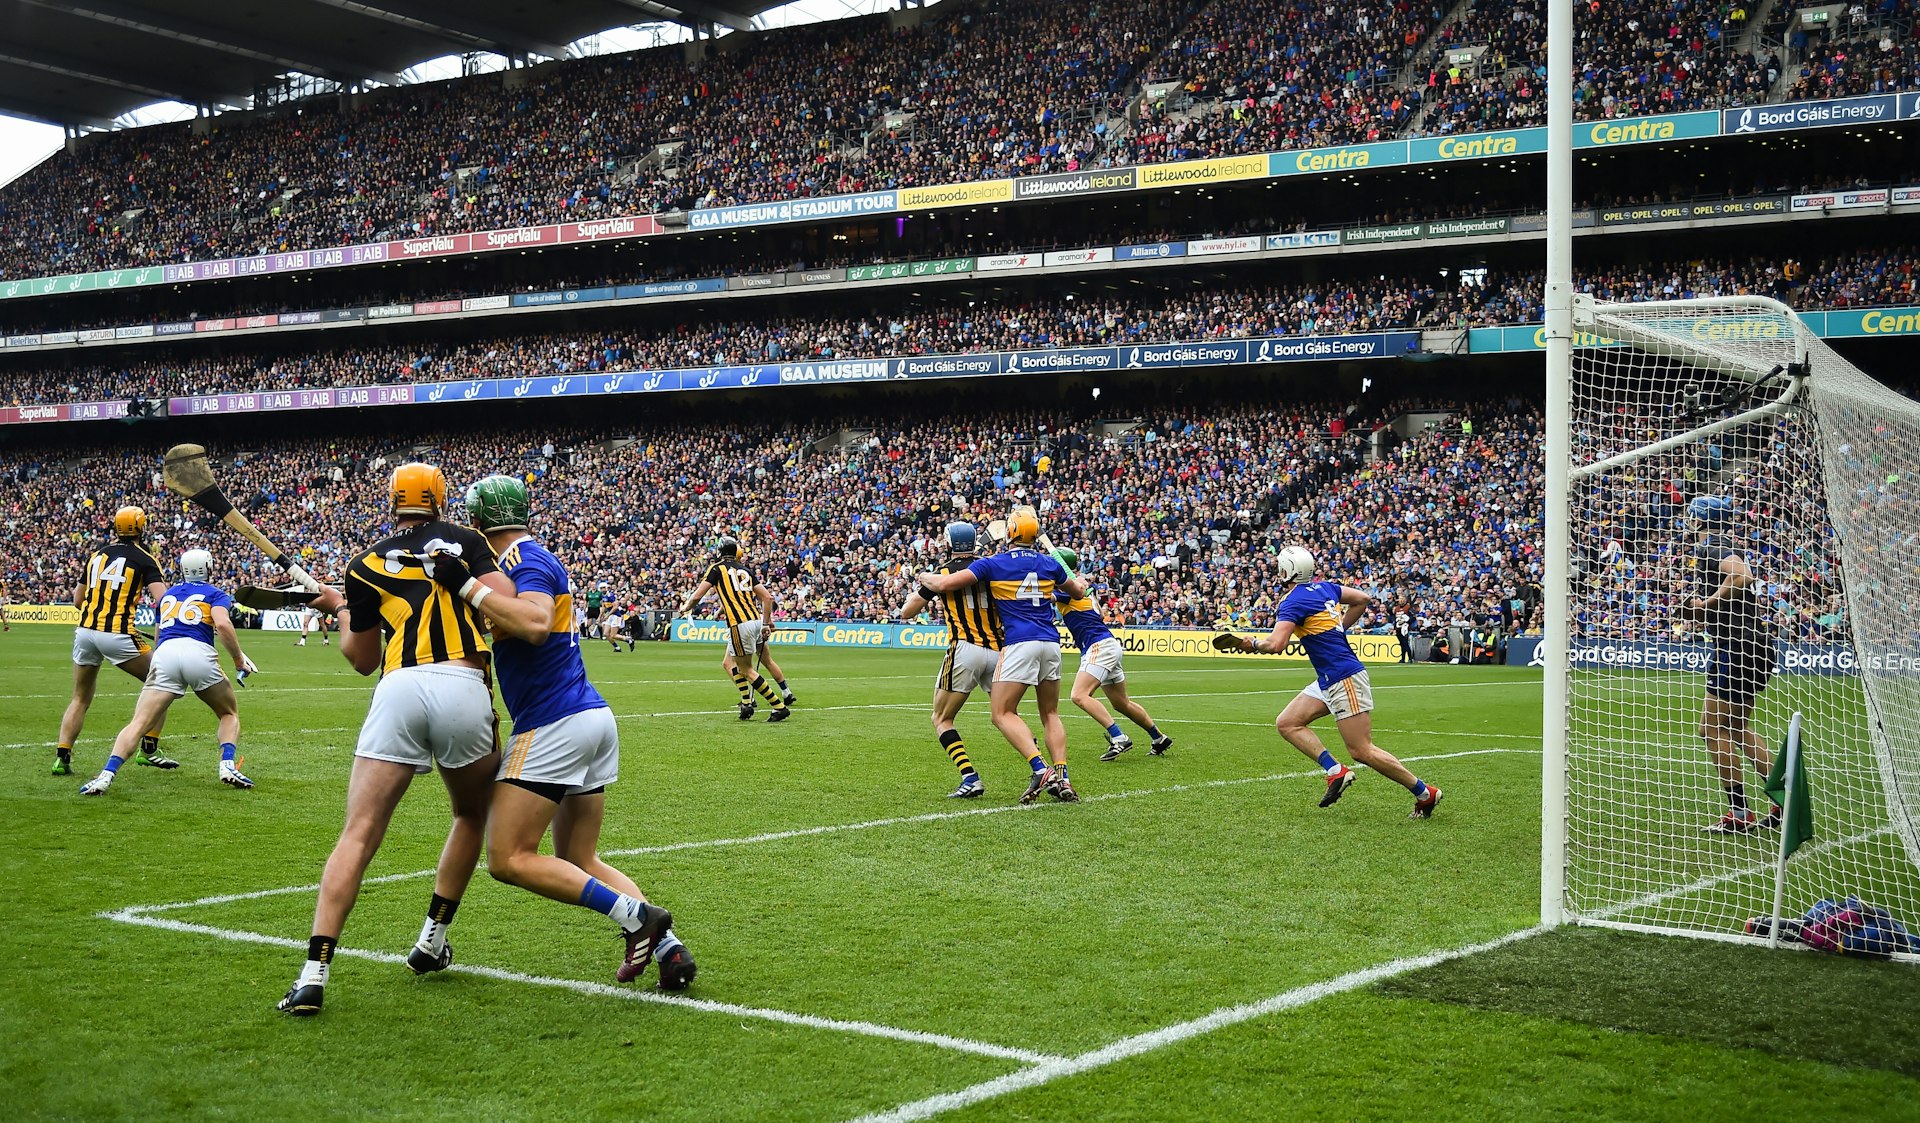 Spectators watch two teams compete in a hurling match at Croke Park, Dublin